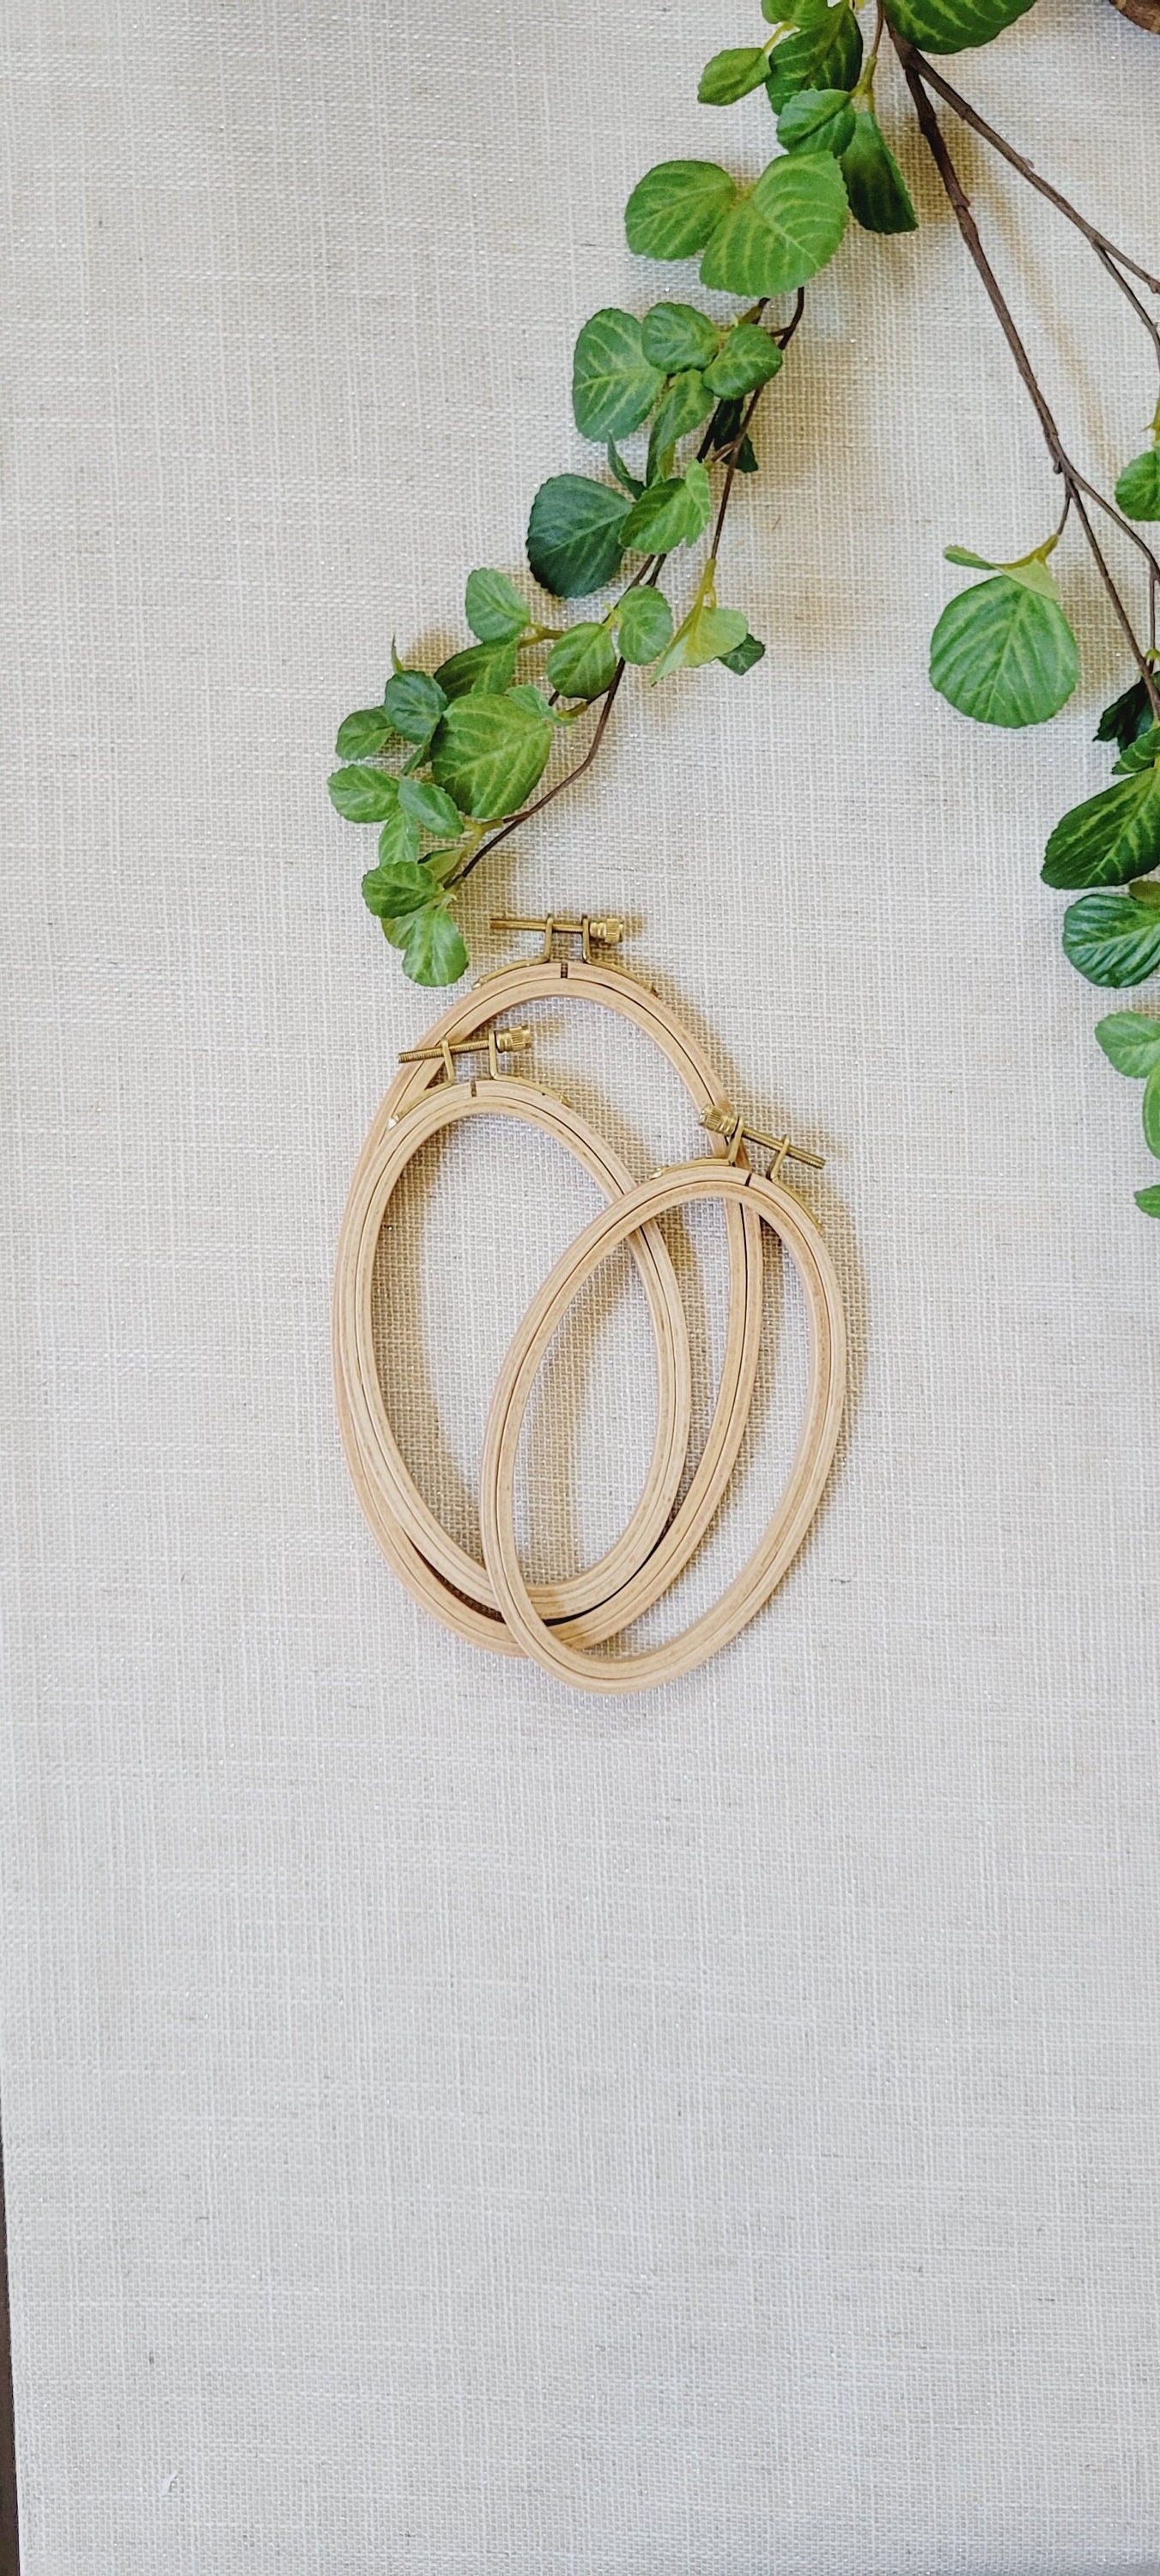 Bamboo Embroidery Hoop 12 Inch